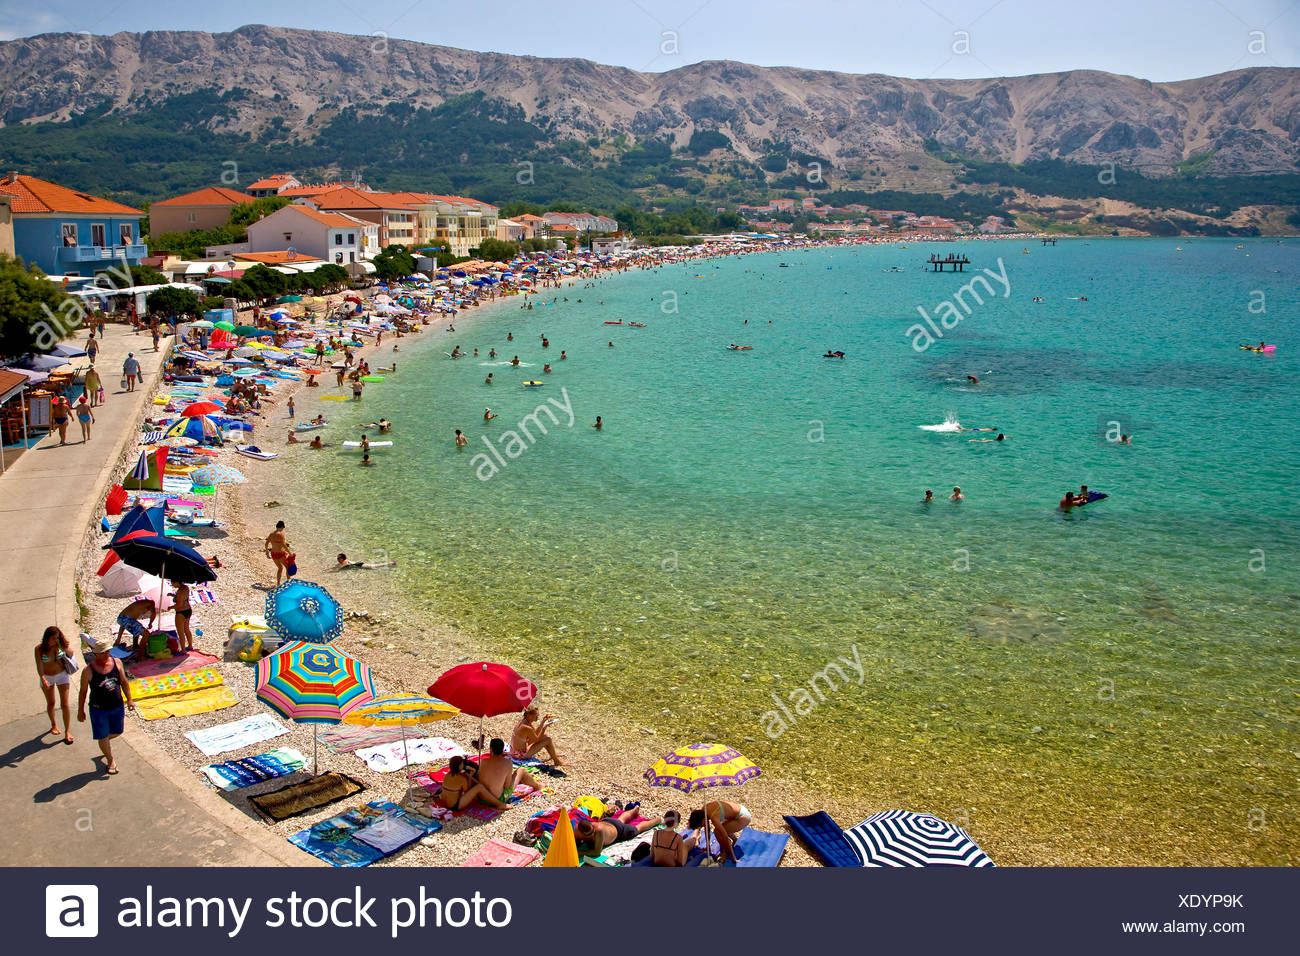 Krk Croatia Beach High Resolution Stock Photography and Images - Alamy